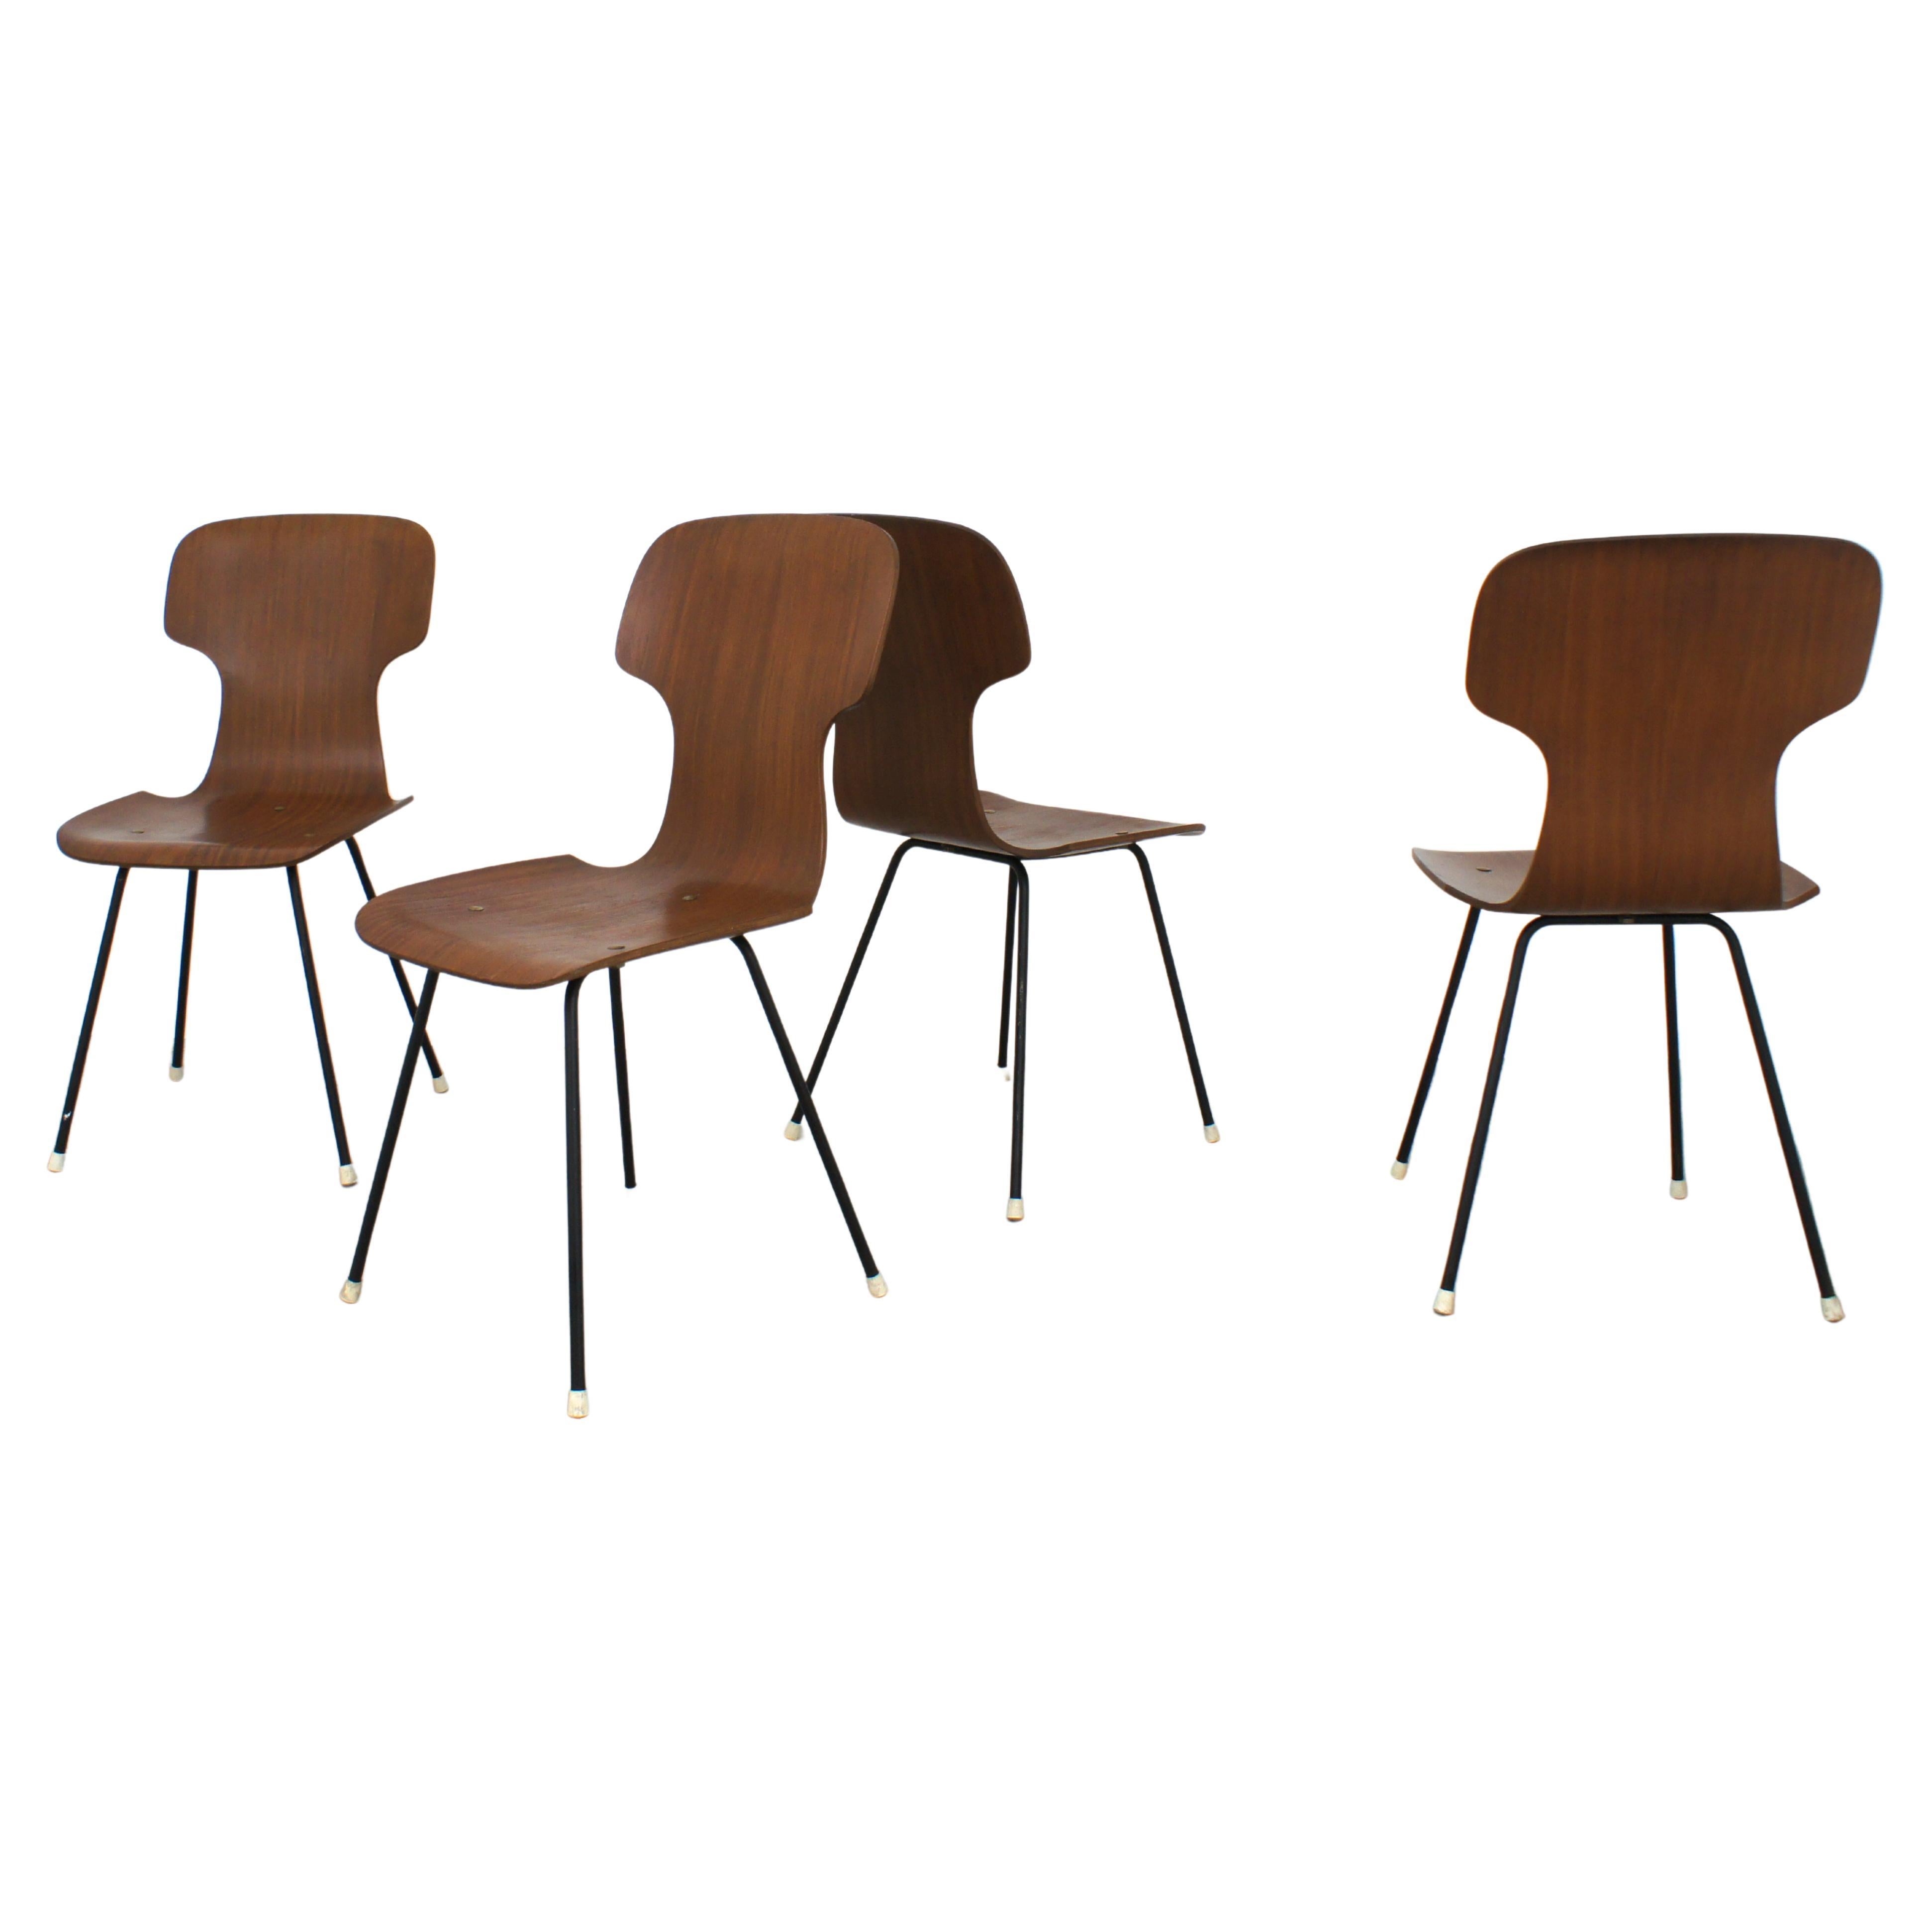 Set of four 1960s Italian bentwood chairs in the style of Carlo Ratti